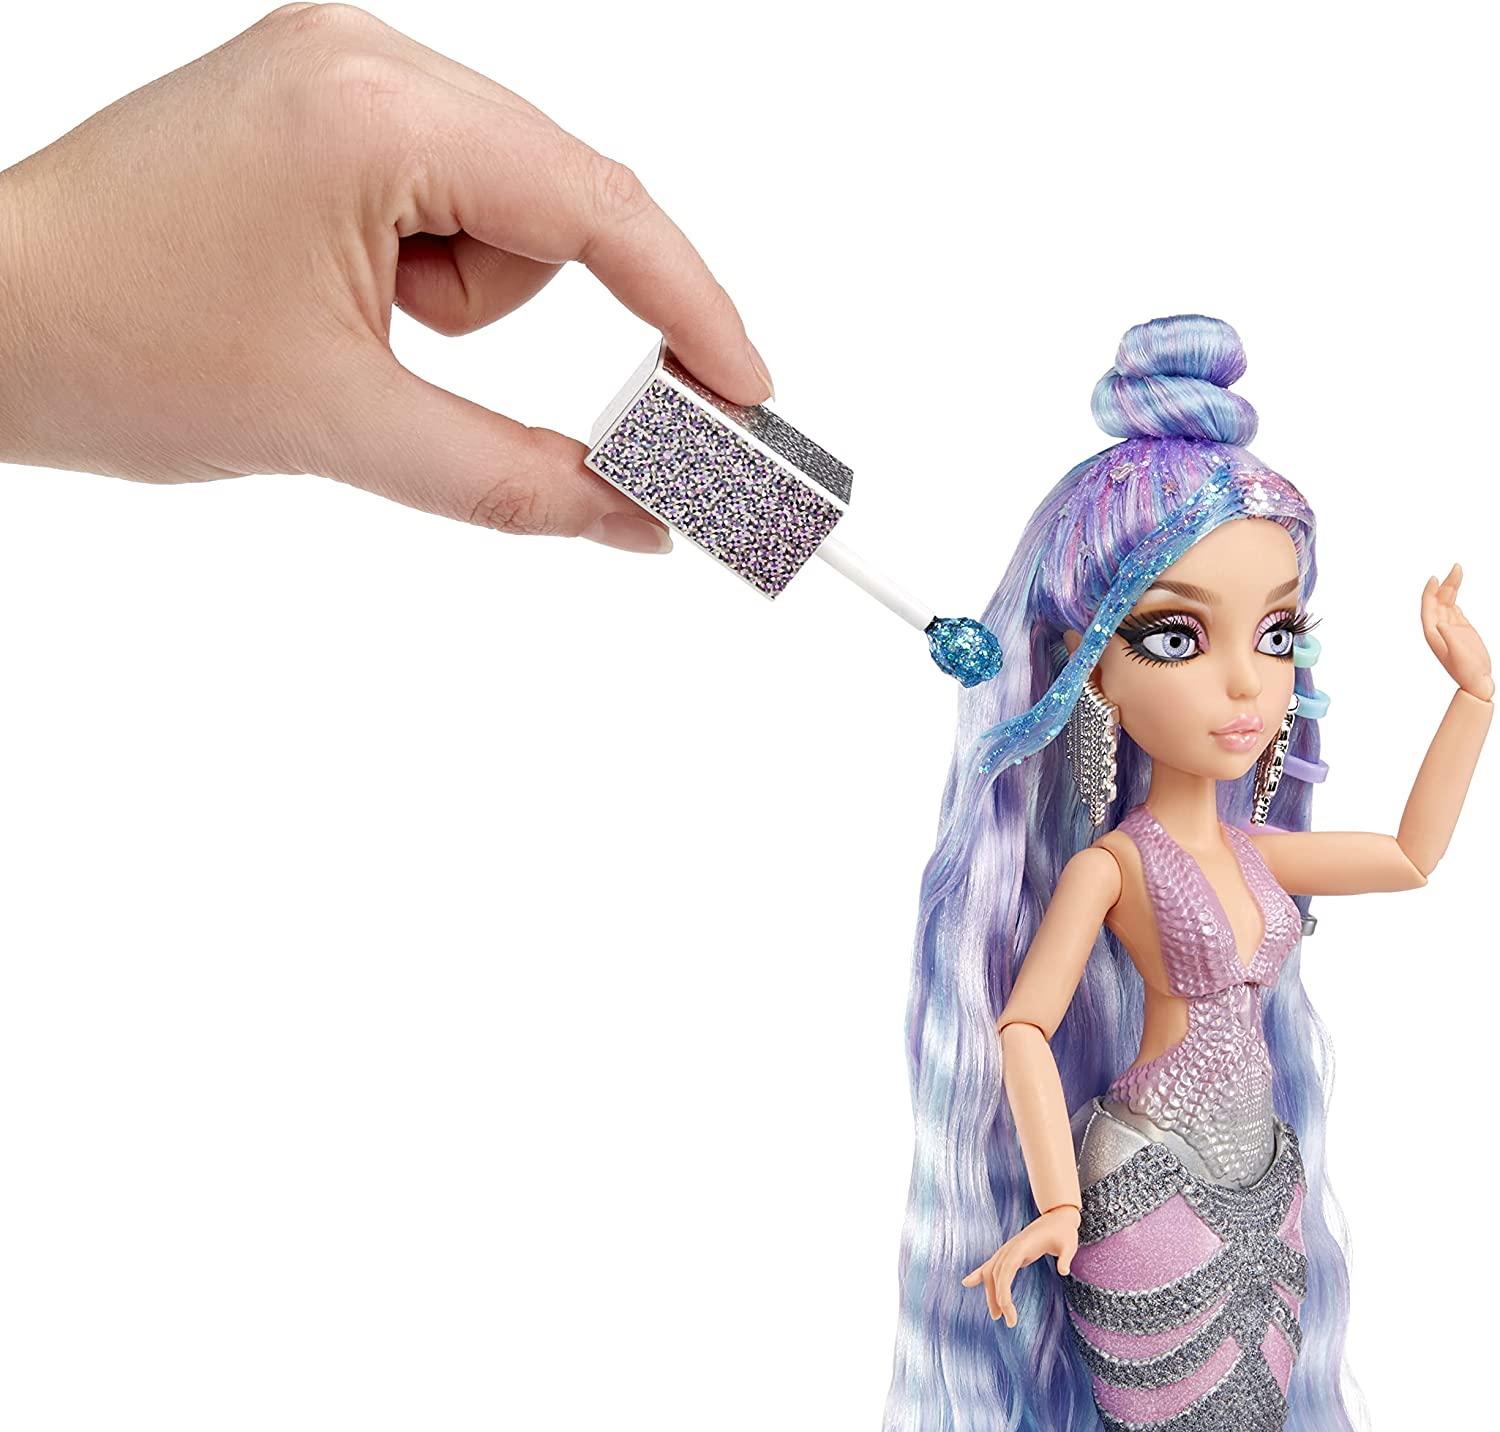 MERMAZE MERMAIDZ Color Change Orra Deluxe Fashion Doll with Wear and Share Hair Play